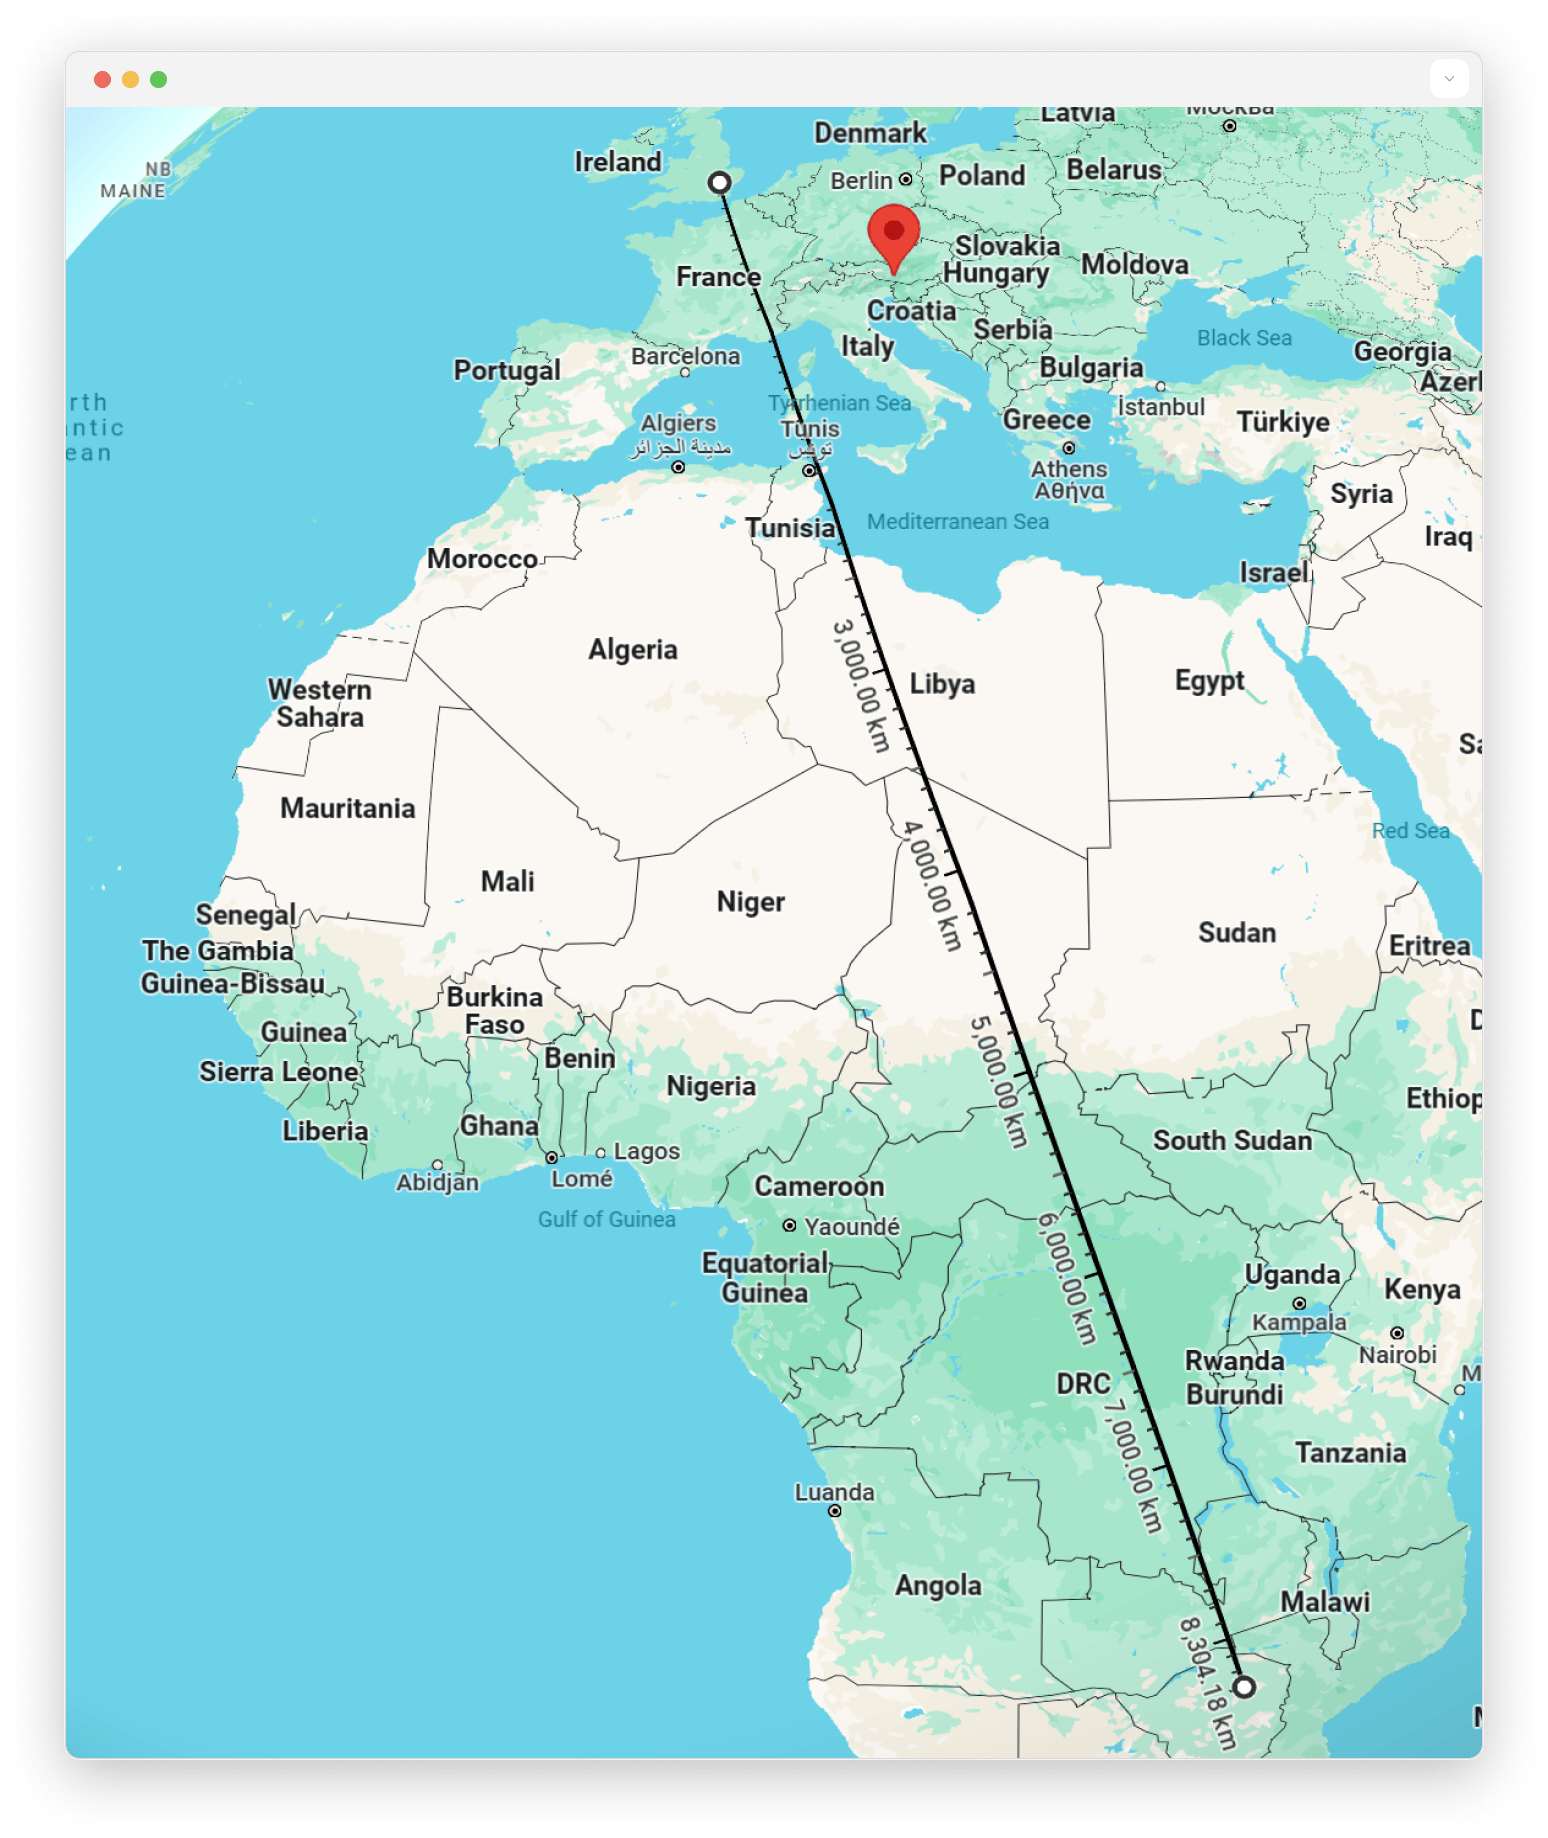 A map showing the distance in a straight line from London, the capital of the United Kingdom, to Harare, the capital of Zimbabwe